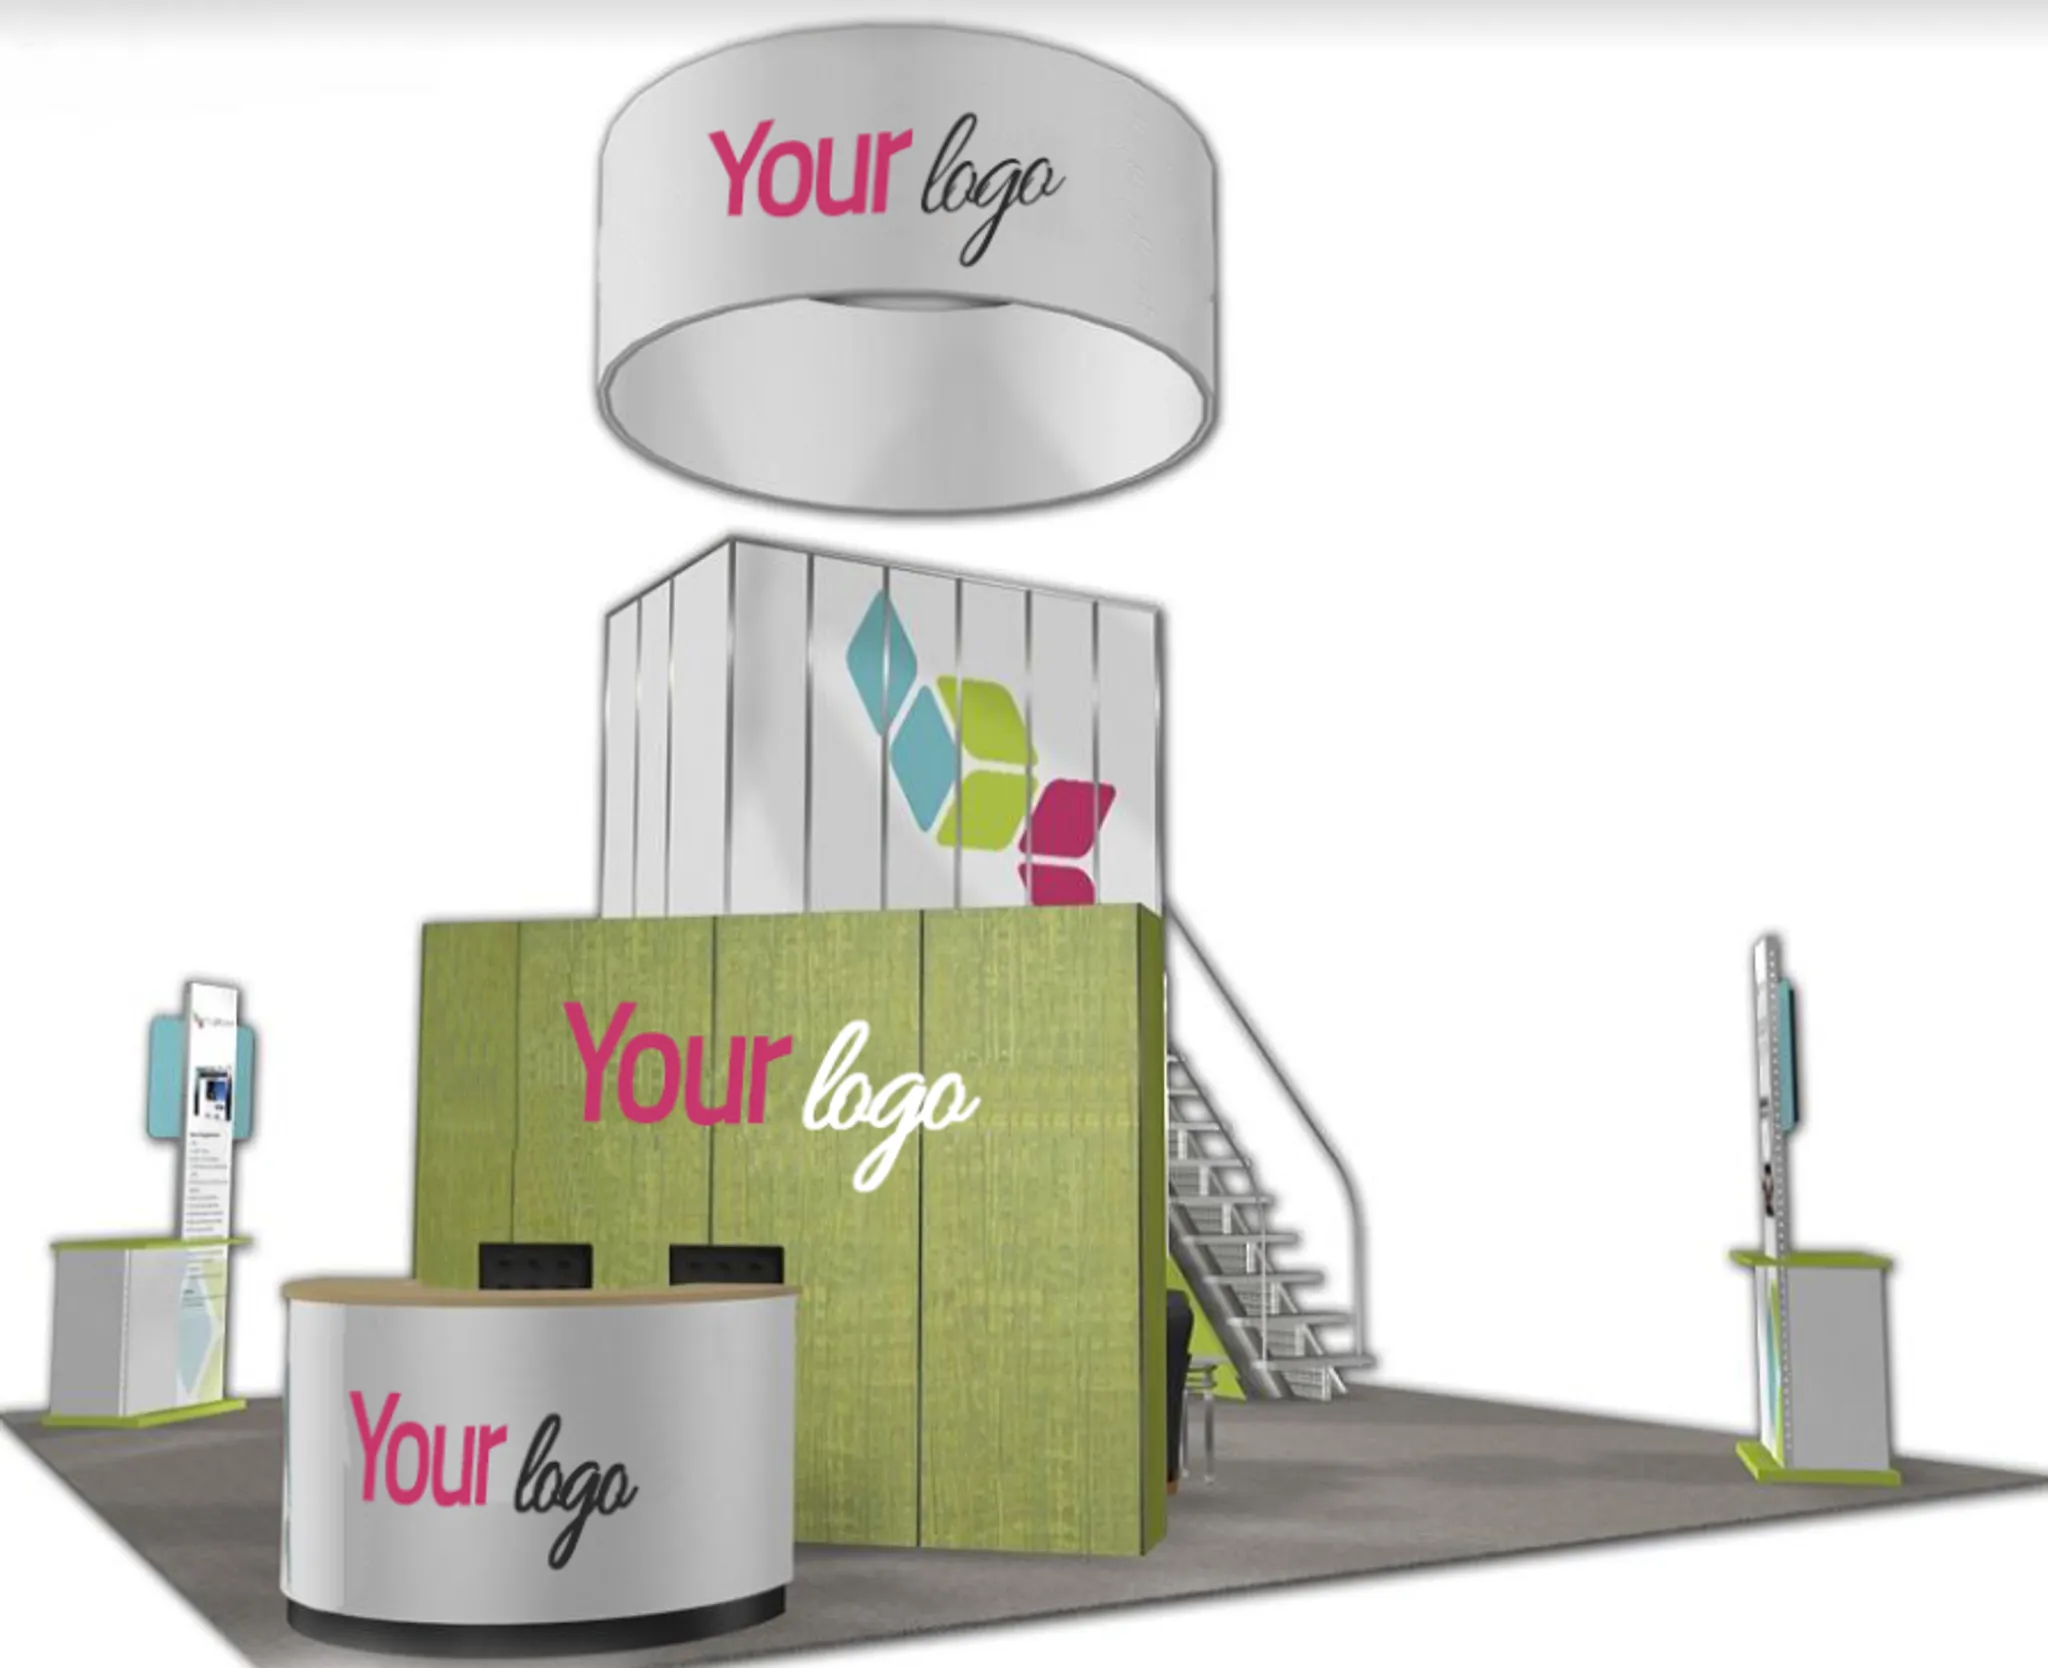  30X30 trade show booth